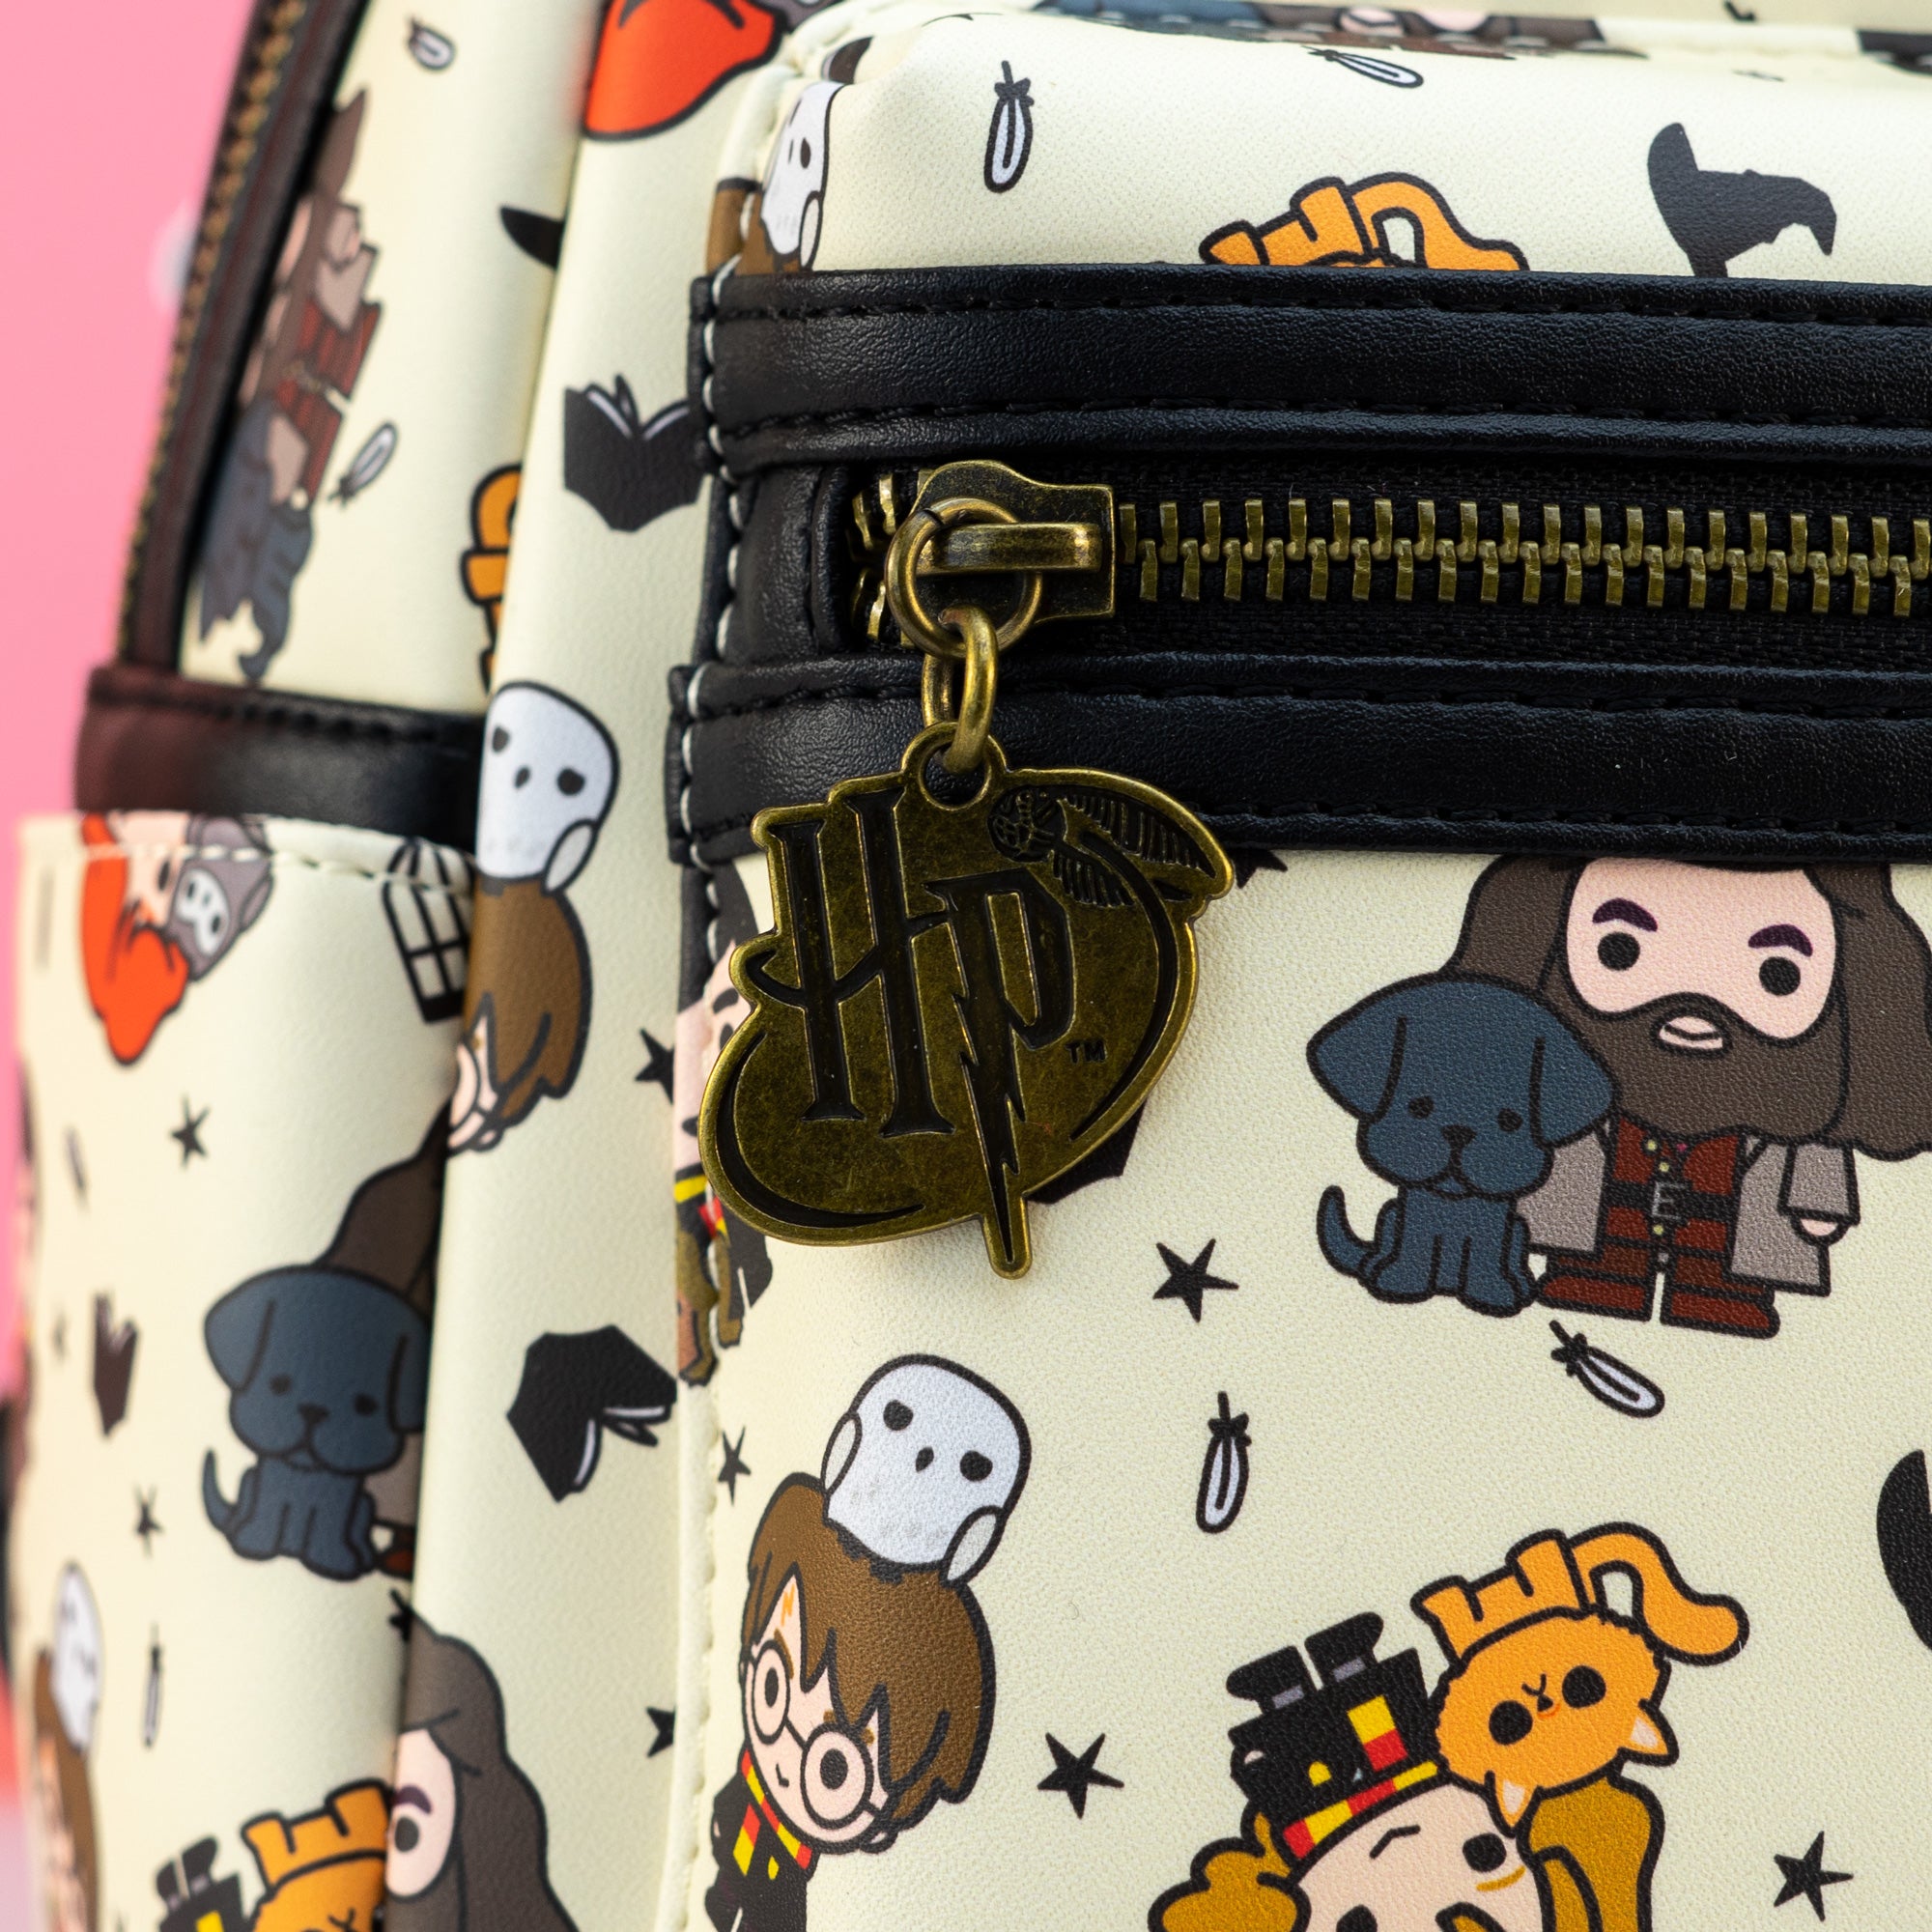 Loungefly x Harry Potter Character Chibi Print Mini Backpack